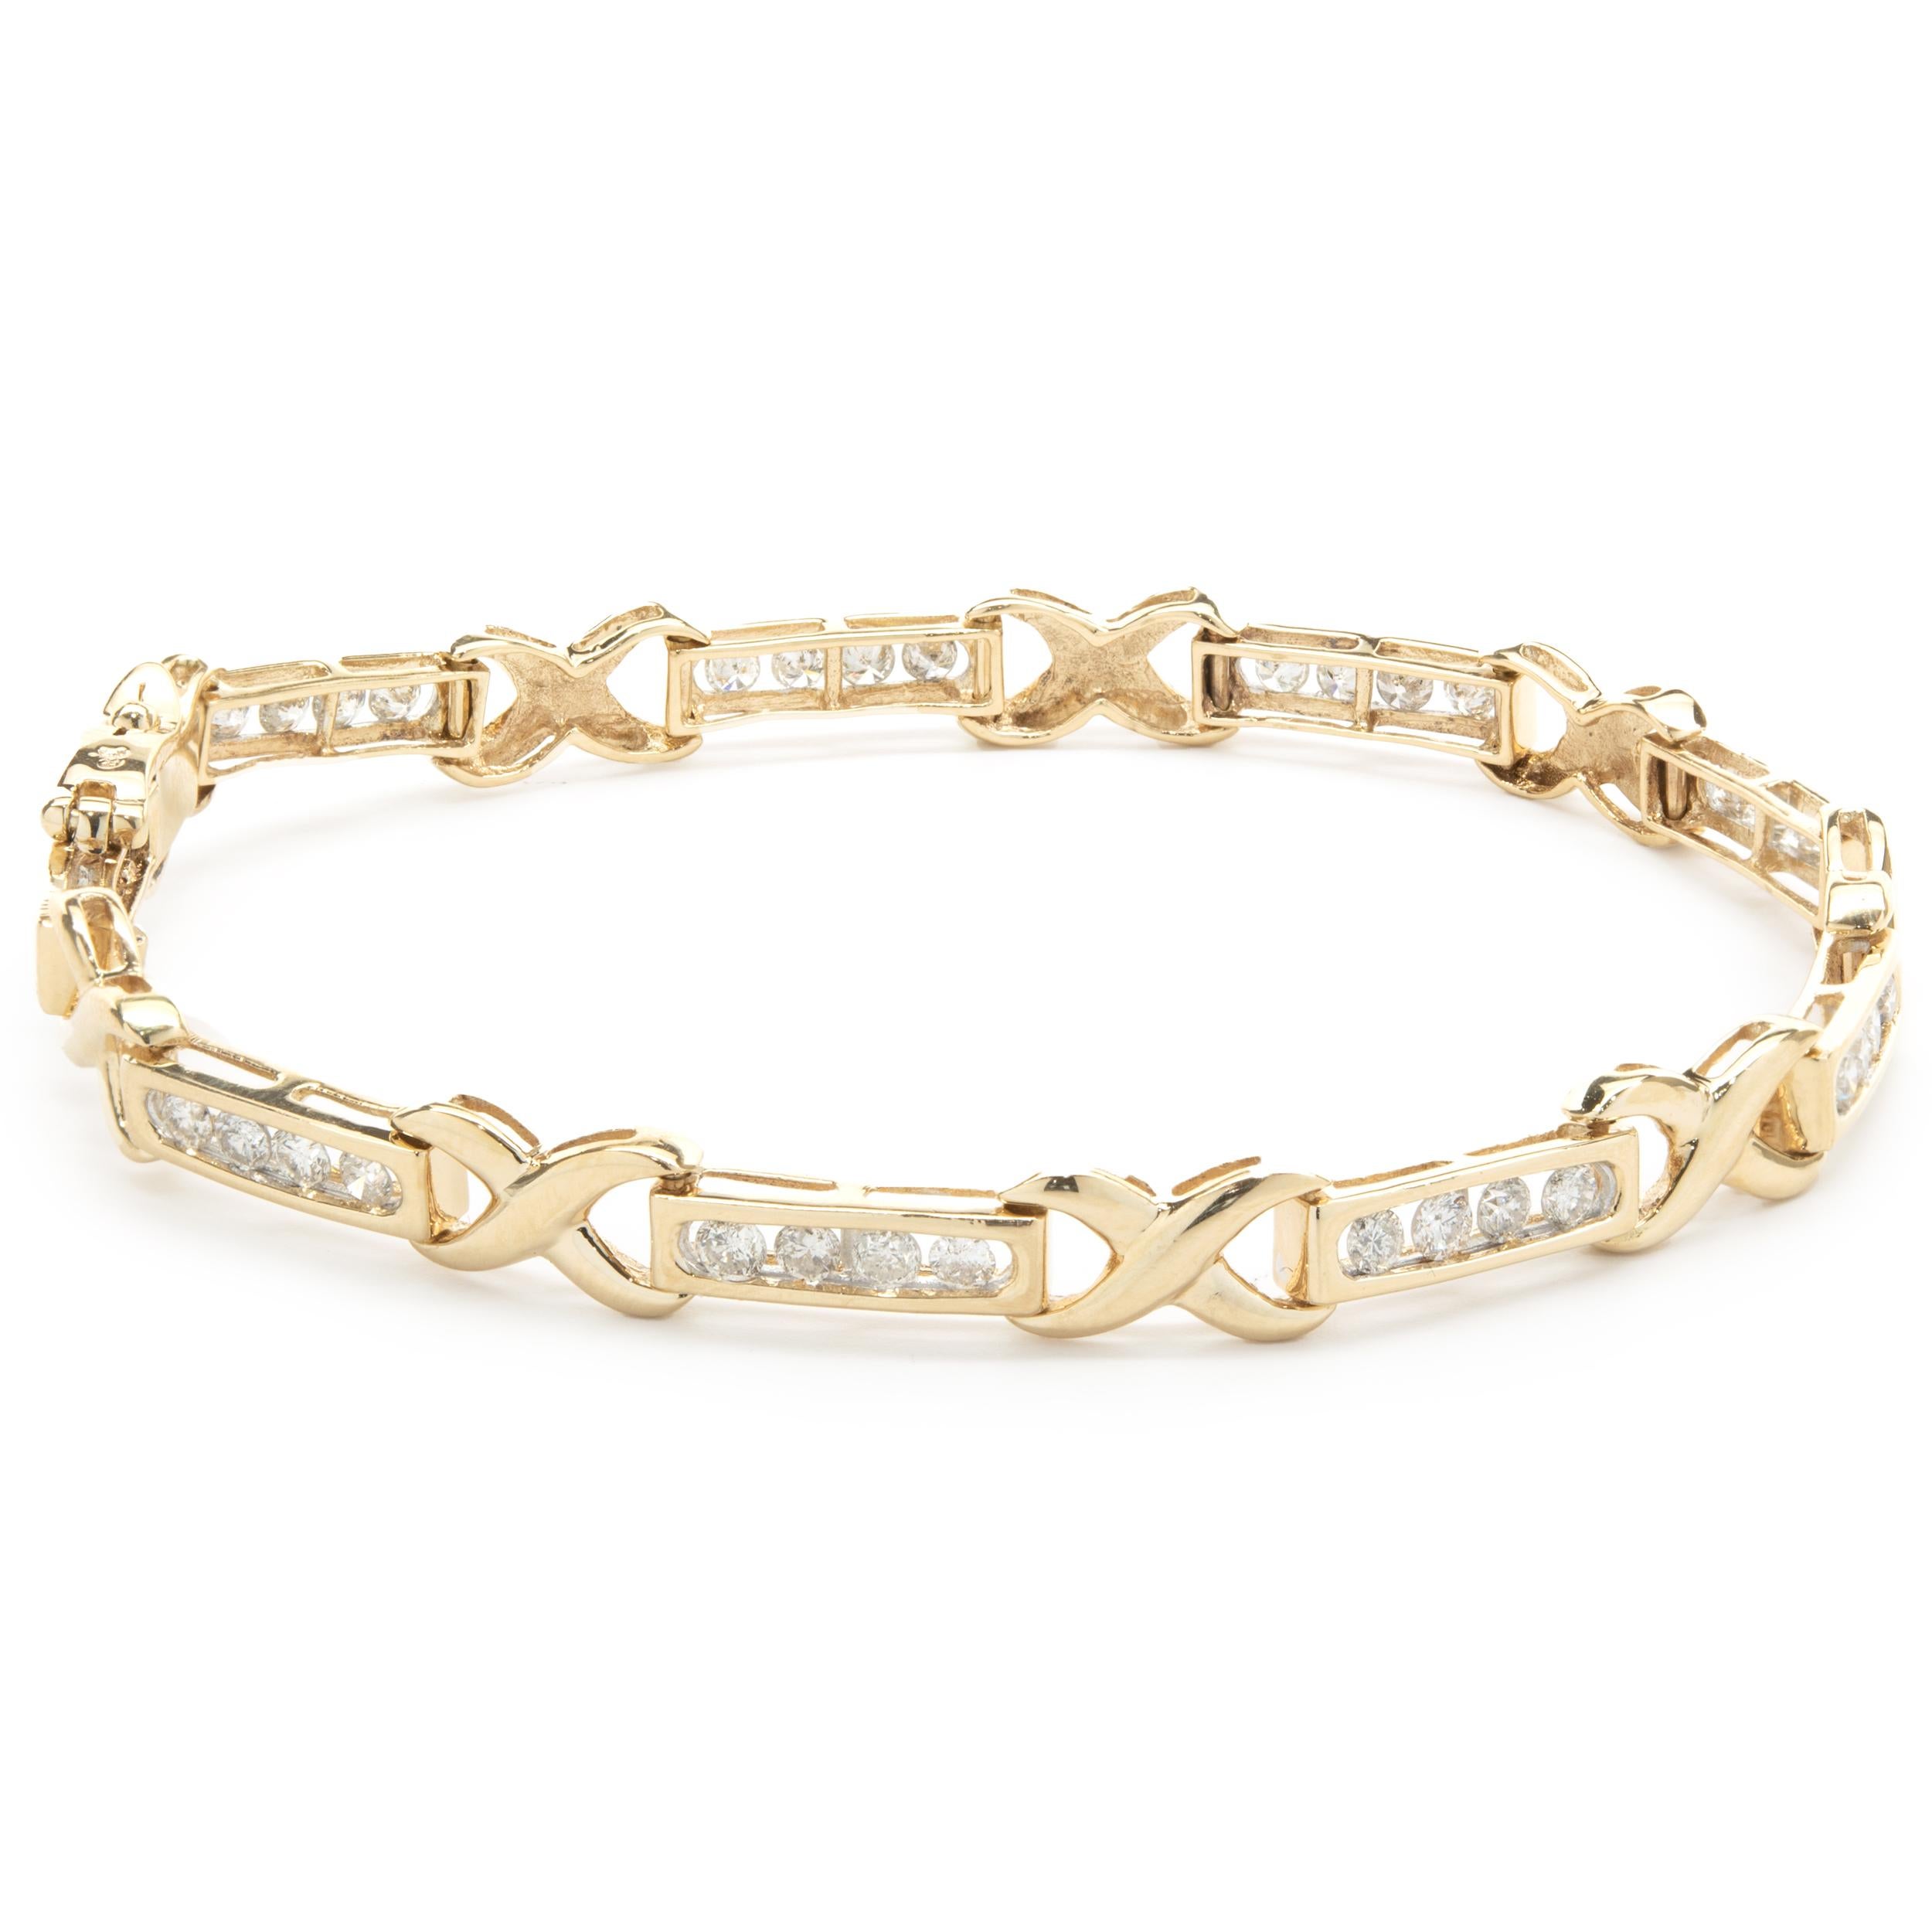 Designer: custom 
Material: 14K yellow gold
Diamond: 36 round brilliant cut = 1.80cttw
Color:  H/I
Clarity: SI1
Dimensions: bracelet will fit up to a 7-inch wrist
Weight: 10.43 grams